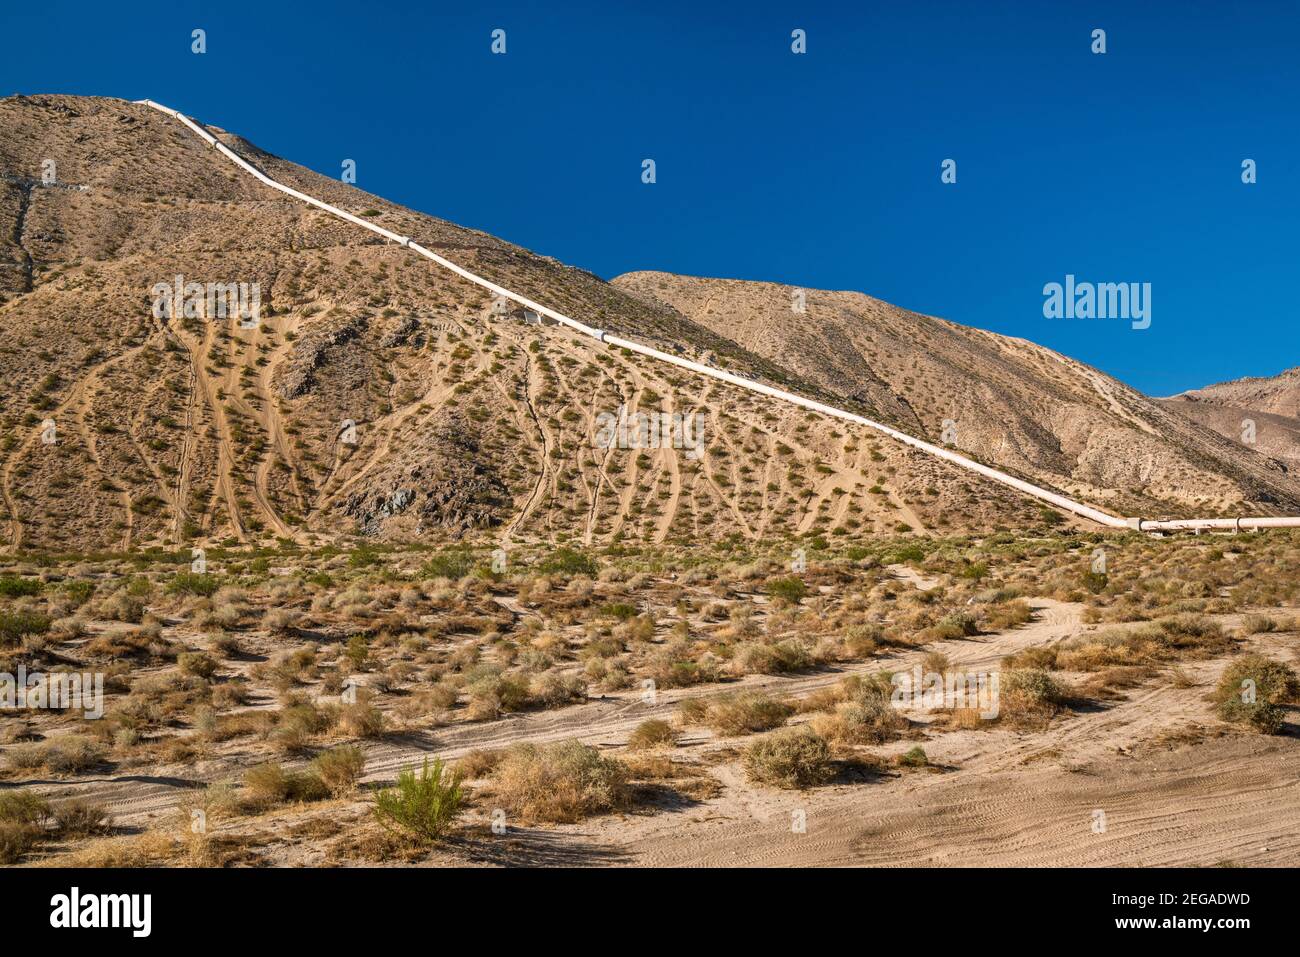 Los Angeles Aqueduct Pipeline, Jawbone Canyon, Jawbone-Butterbredt Area of Critical Environmental Concern, Mojave Desert, California, USA Foto Stock